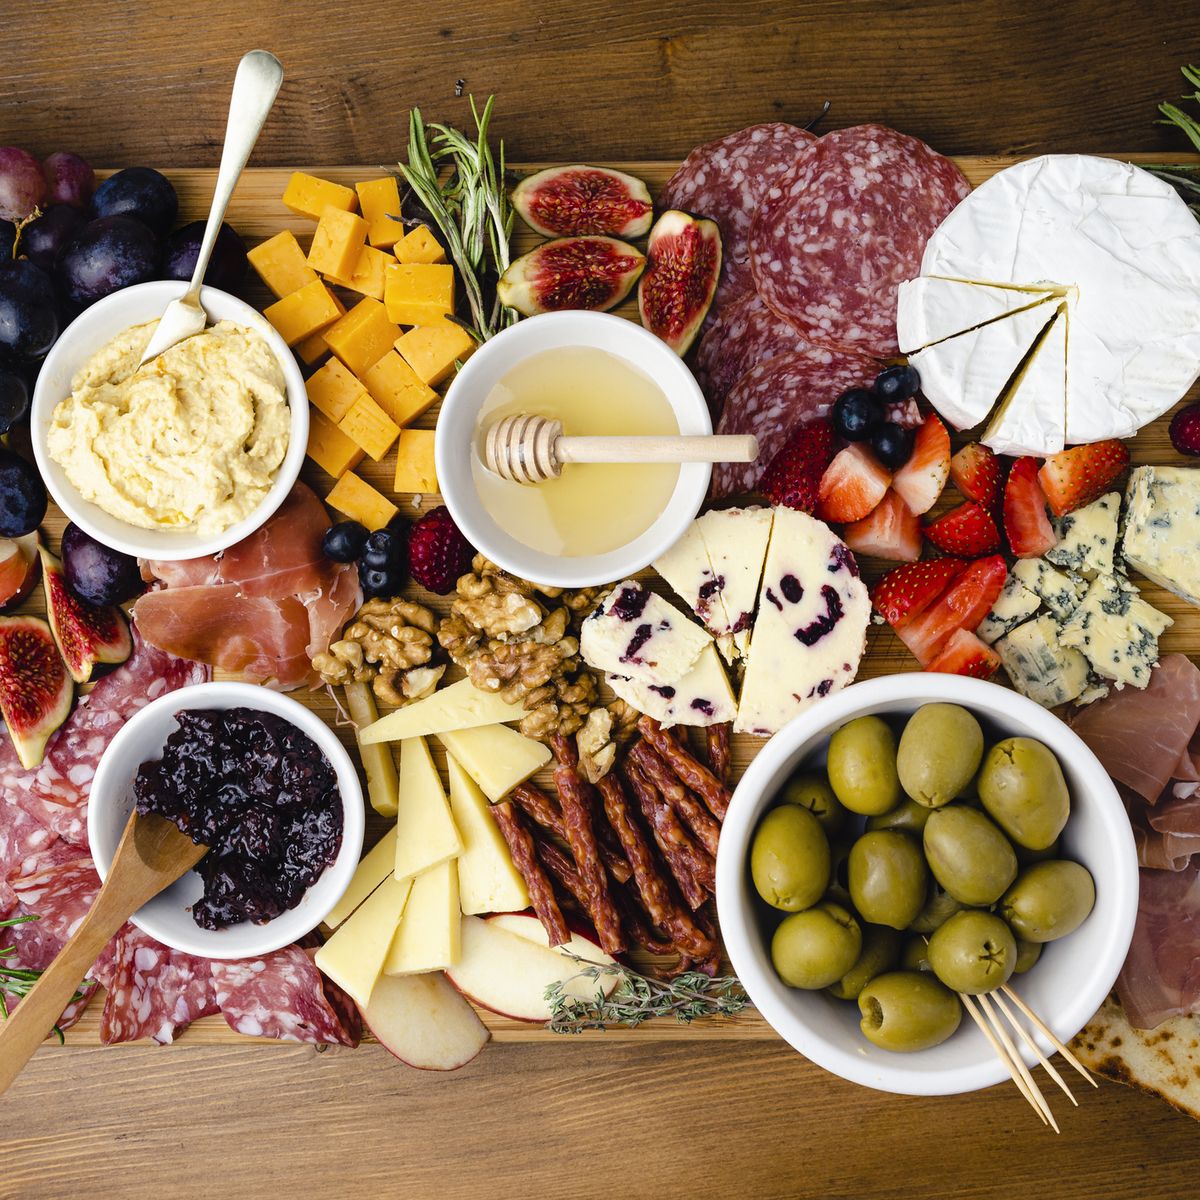 How To Build A Summer Charcuterie Board - Shared Appetite